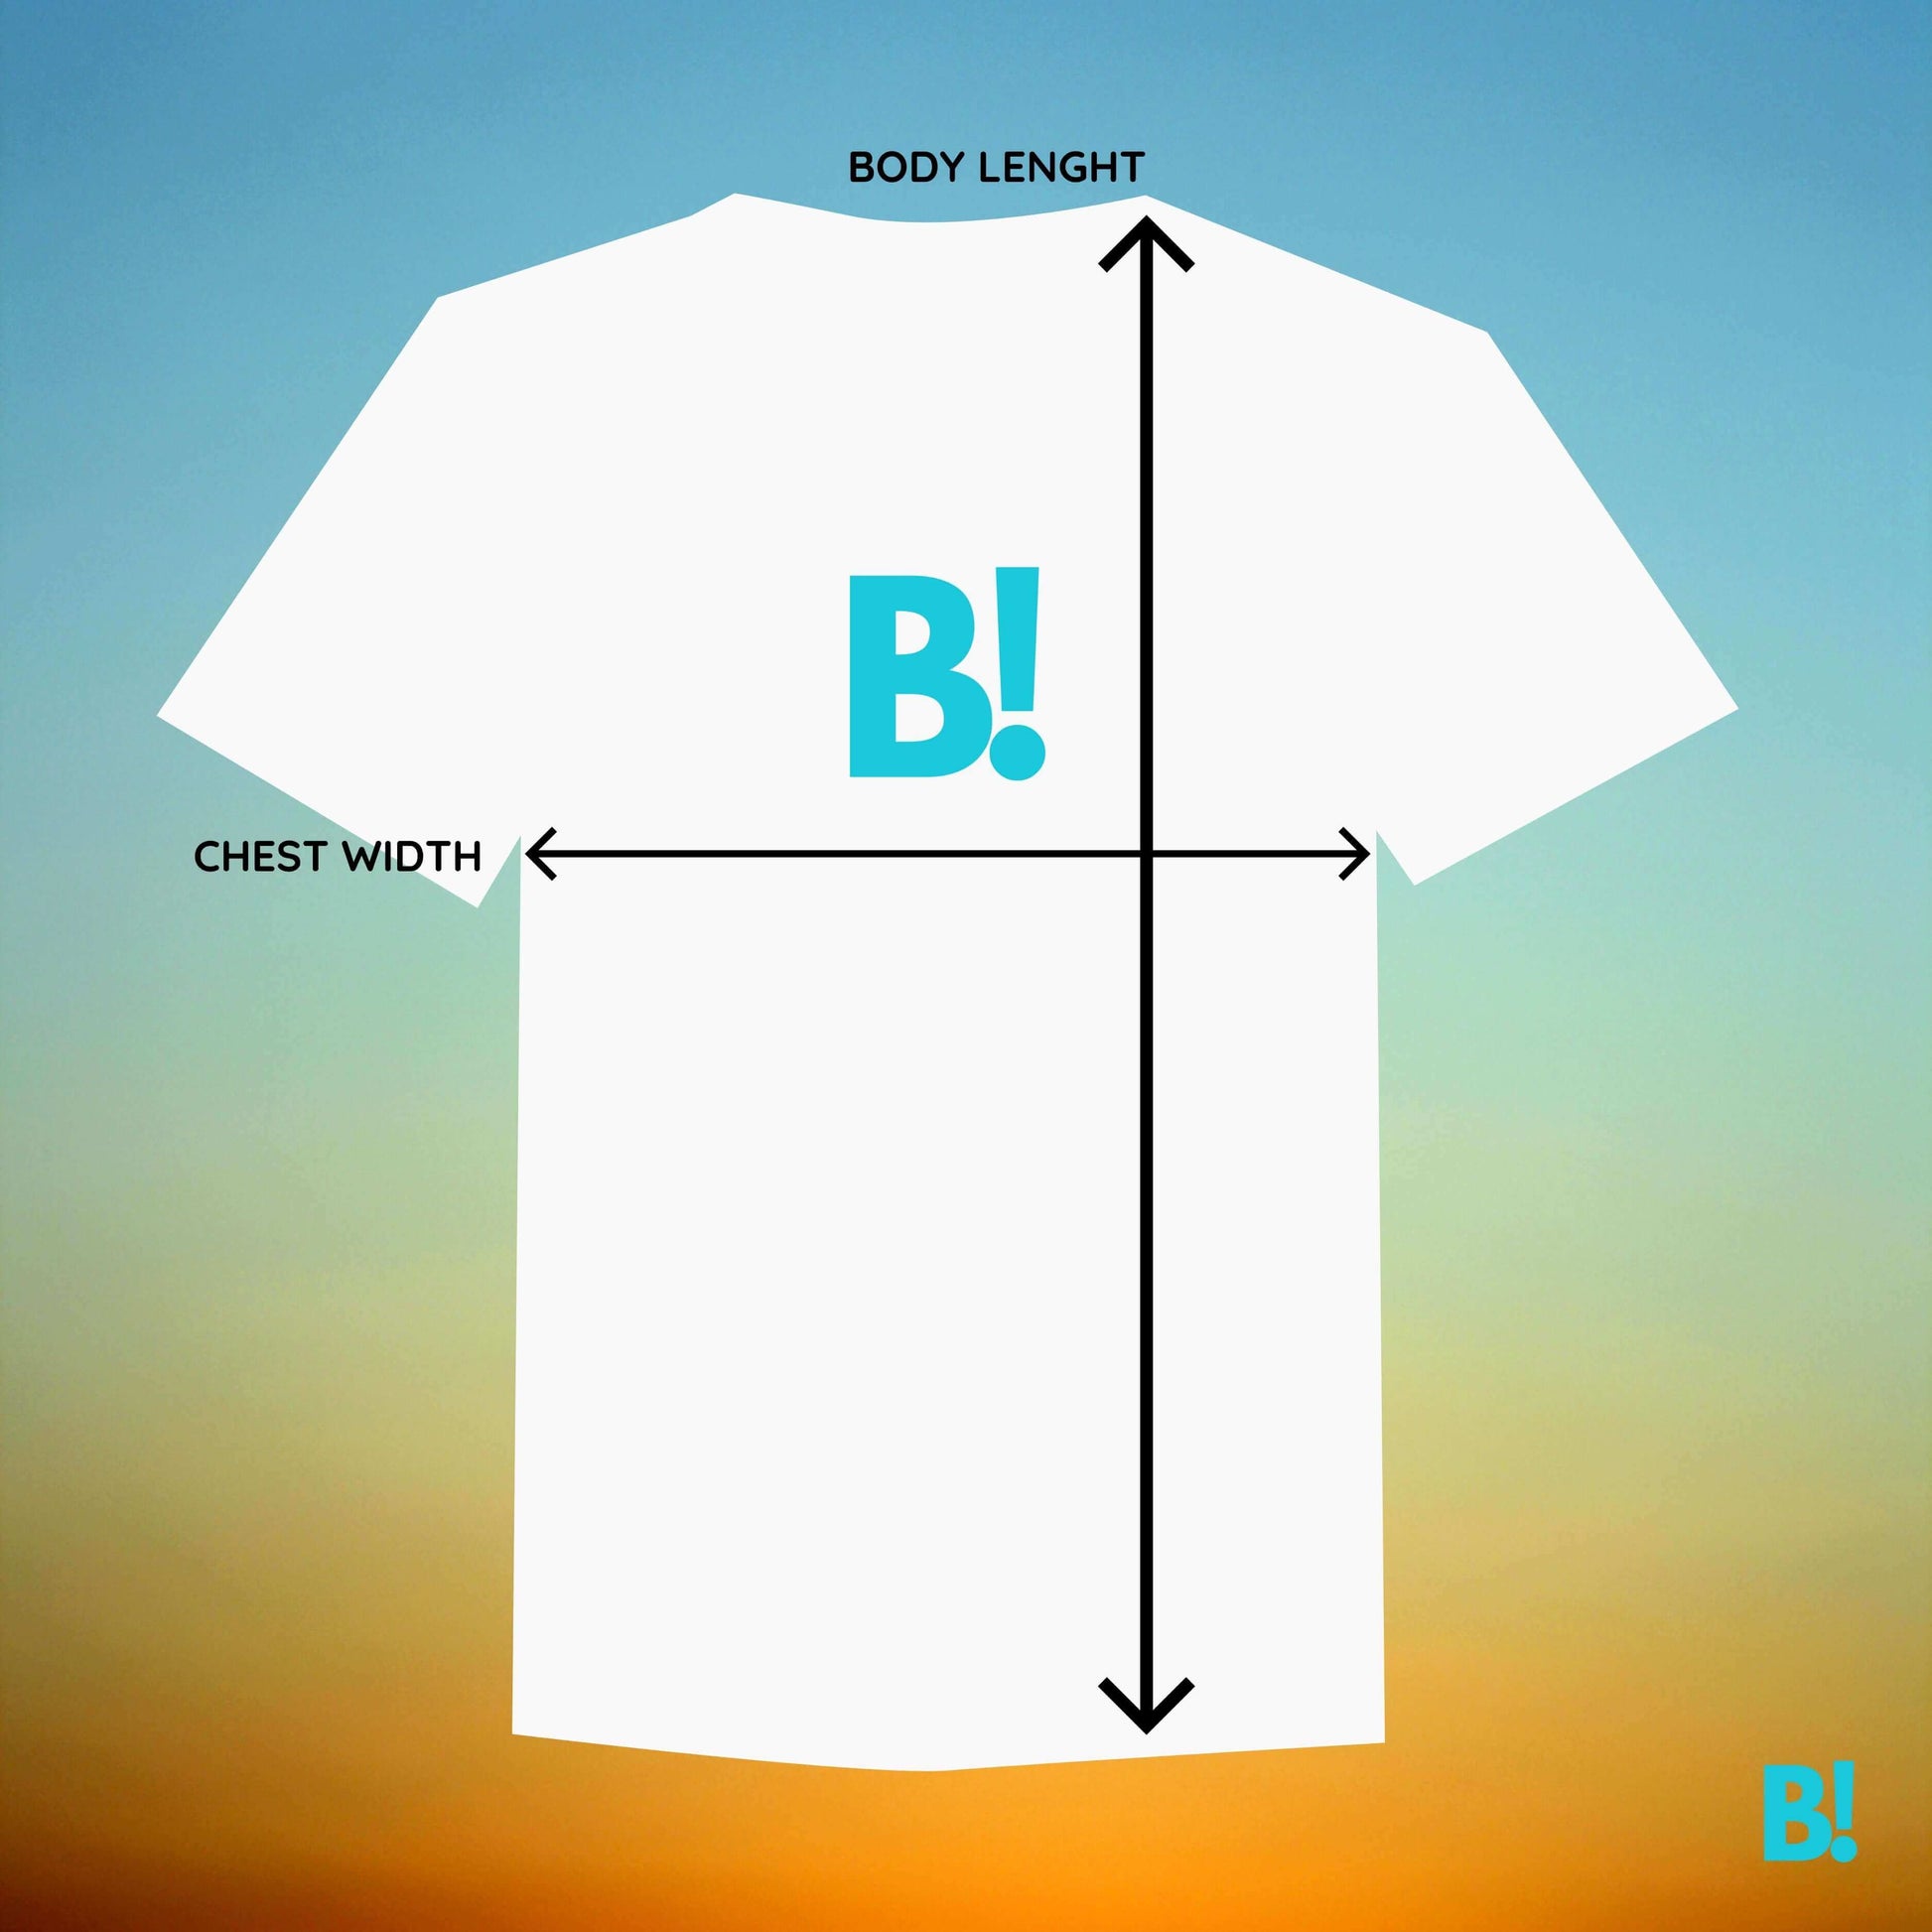 Embrace Summer with KINGFISHER T-Shirt - B!NKY Comfywear Dive into summer with the KINGFISHER T-Shirt. 100% Cotton, unisex, available in S-XXXL. Brighten your wardrobe with nature’s elegance. €29.50 B!NKY Comfywear